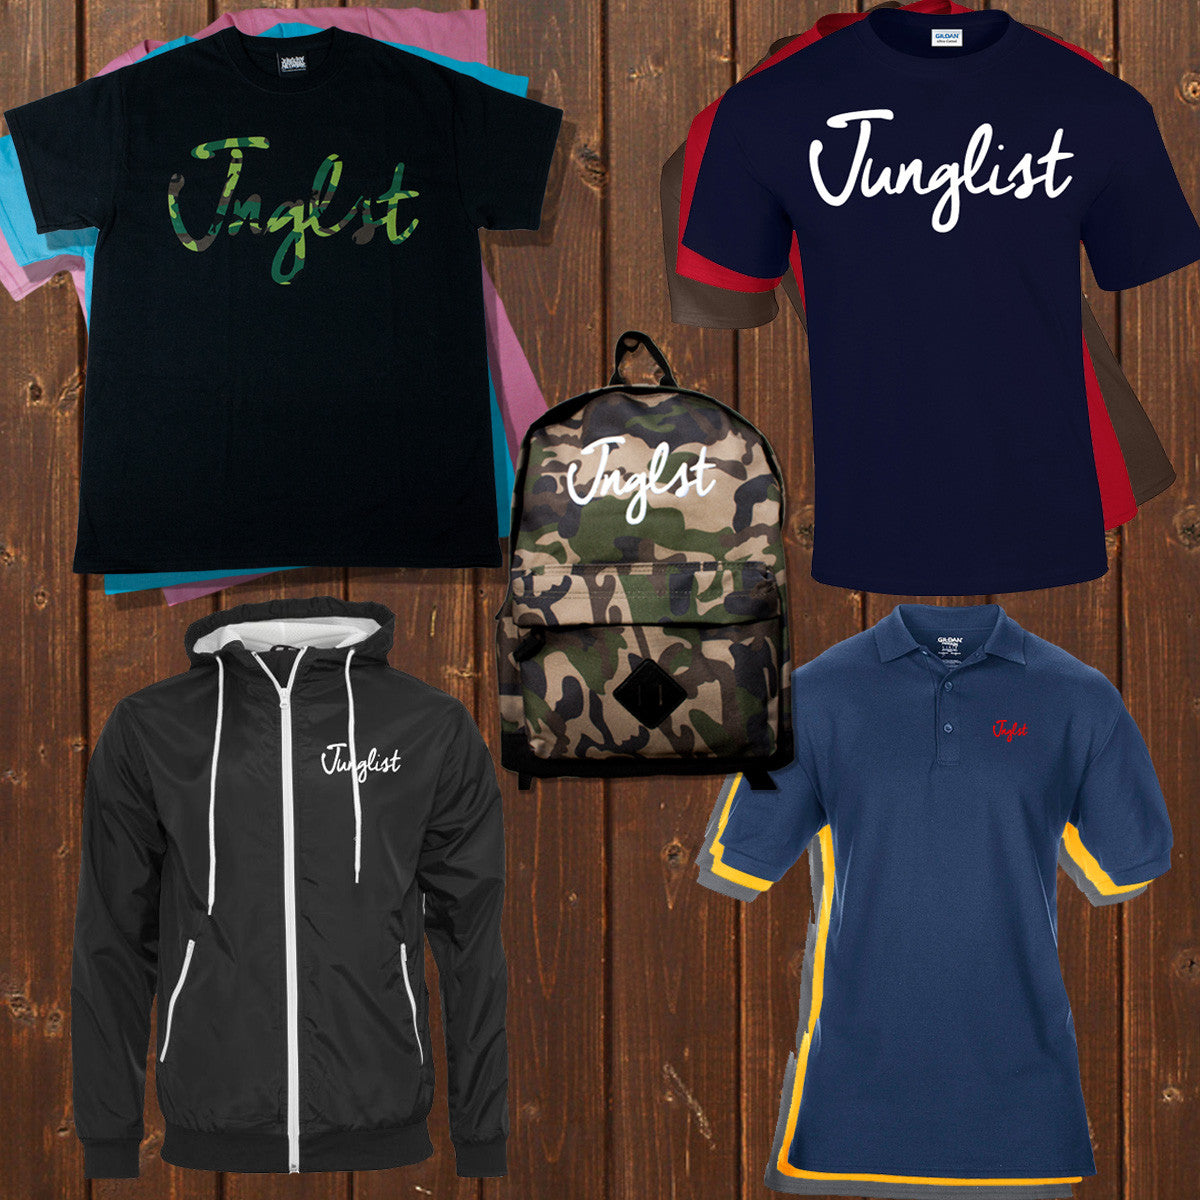 The Jungle Summer Collection | Junglist Network